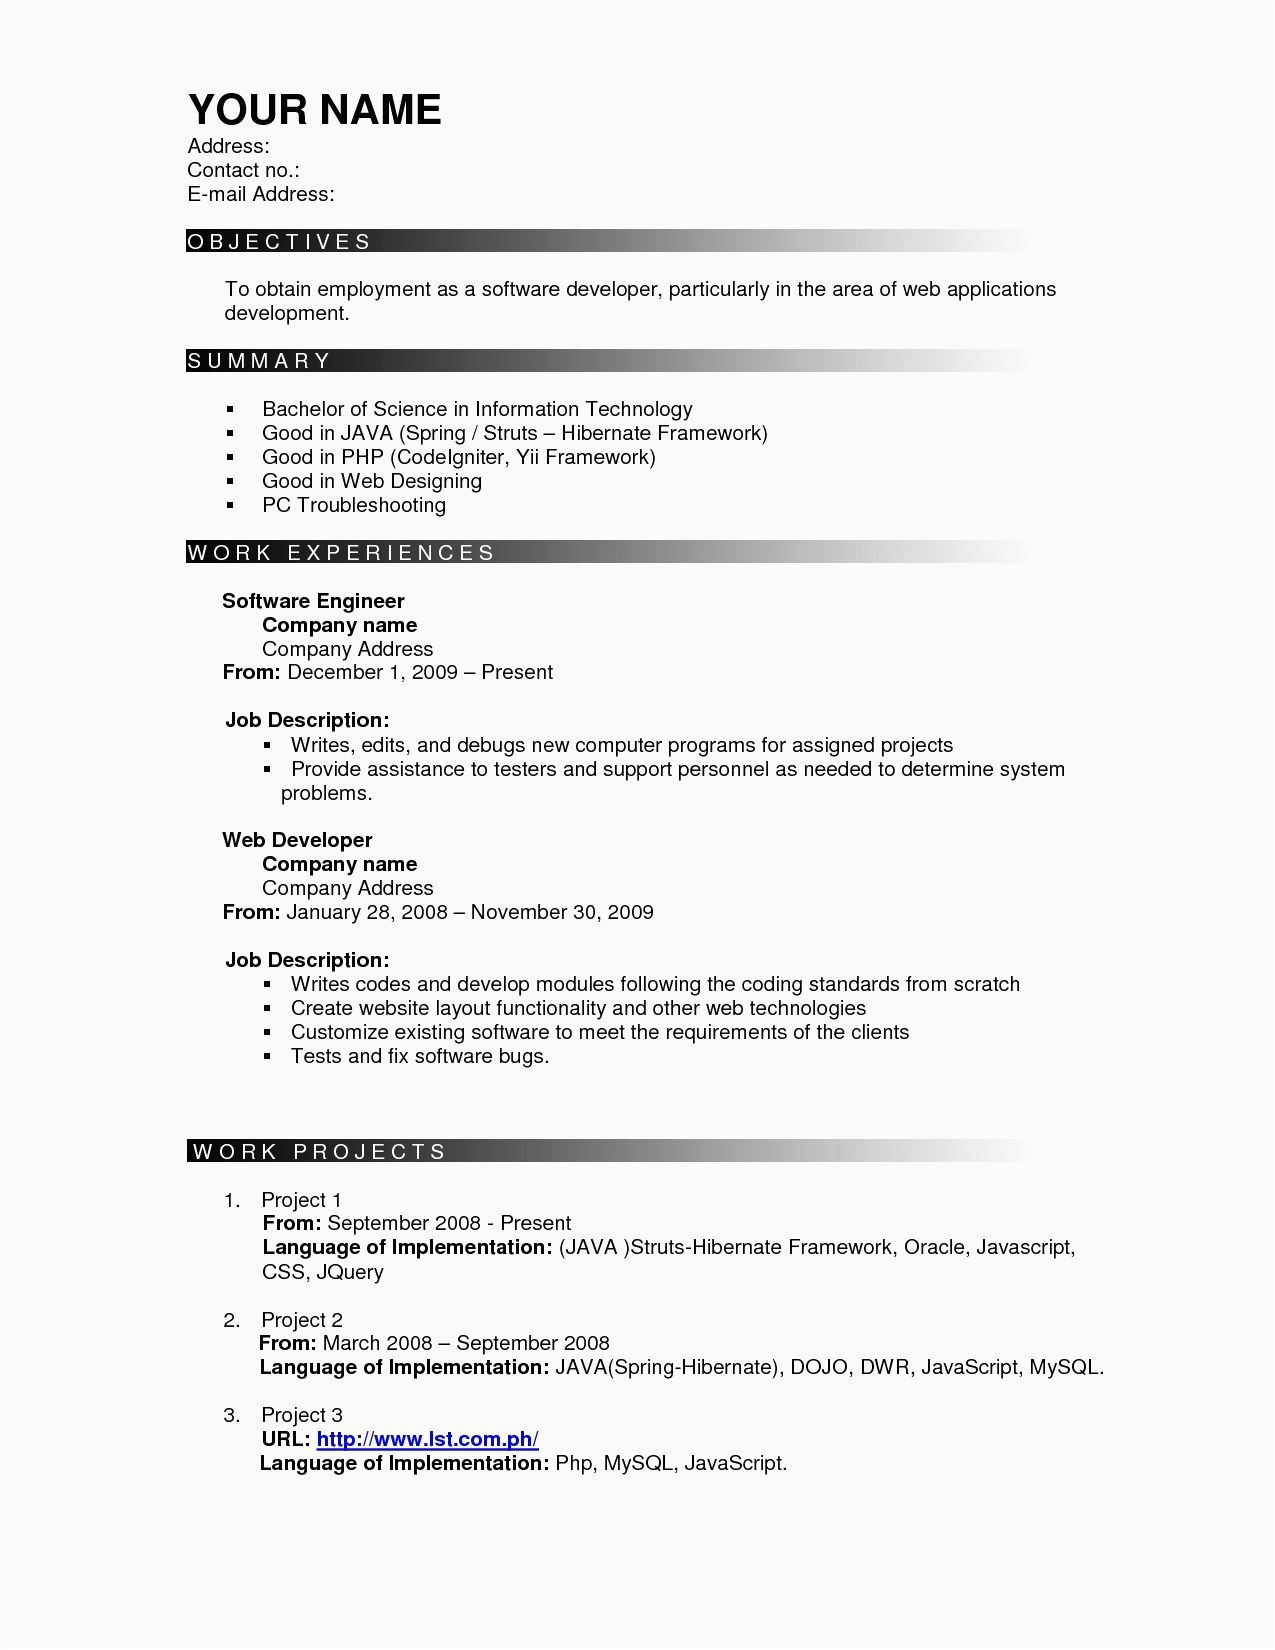 Sap Mm Sample Resume 3 Years Experience 3 Year Experience Resume format Resume Templates